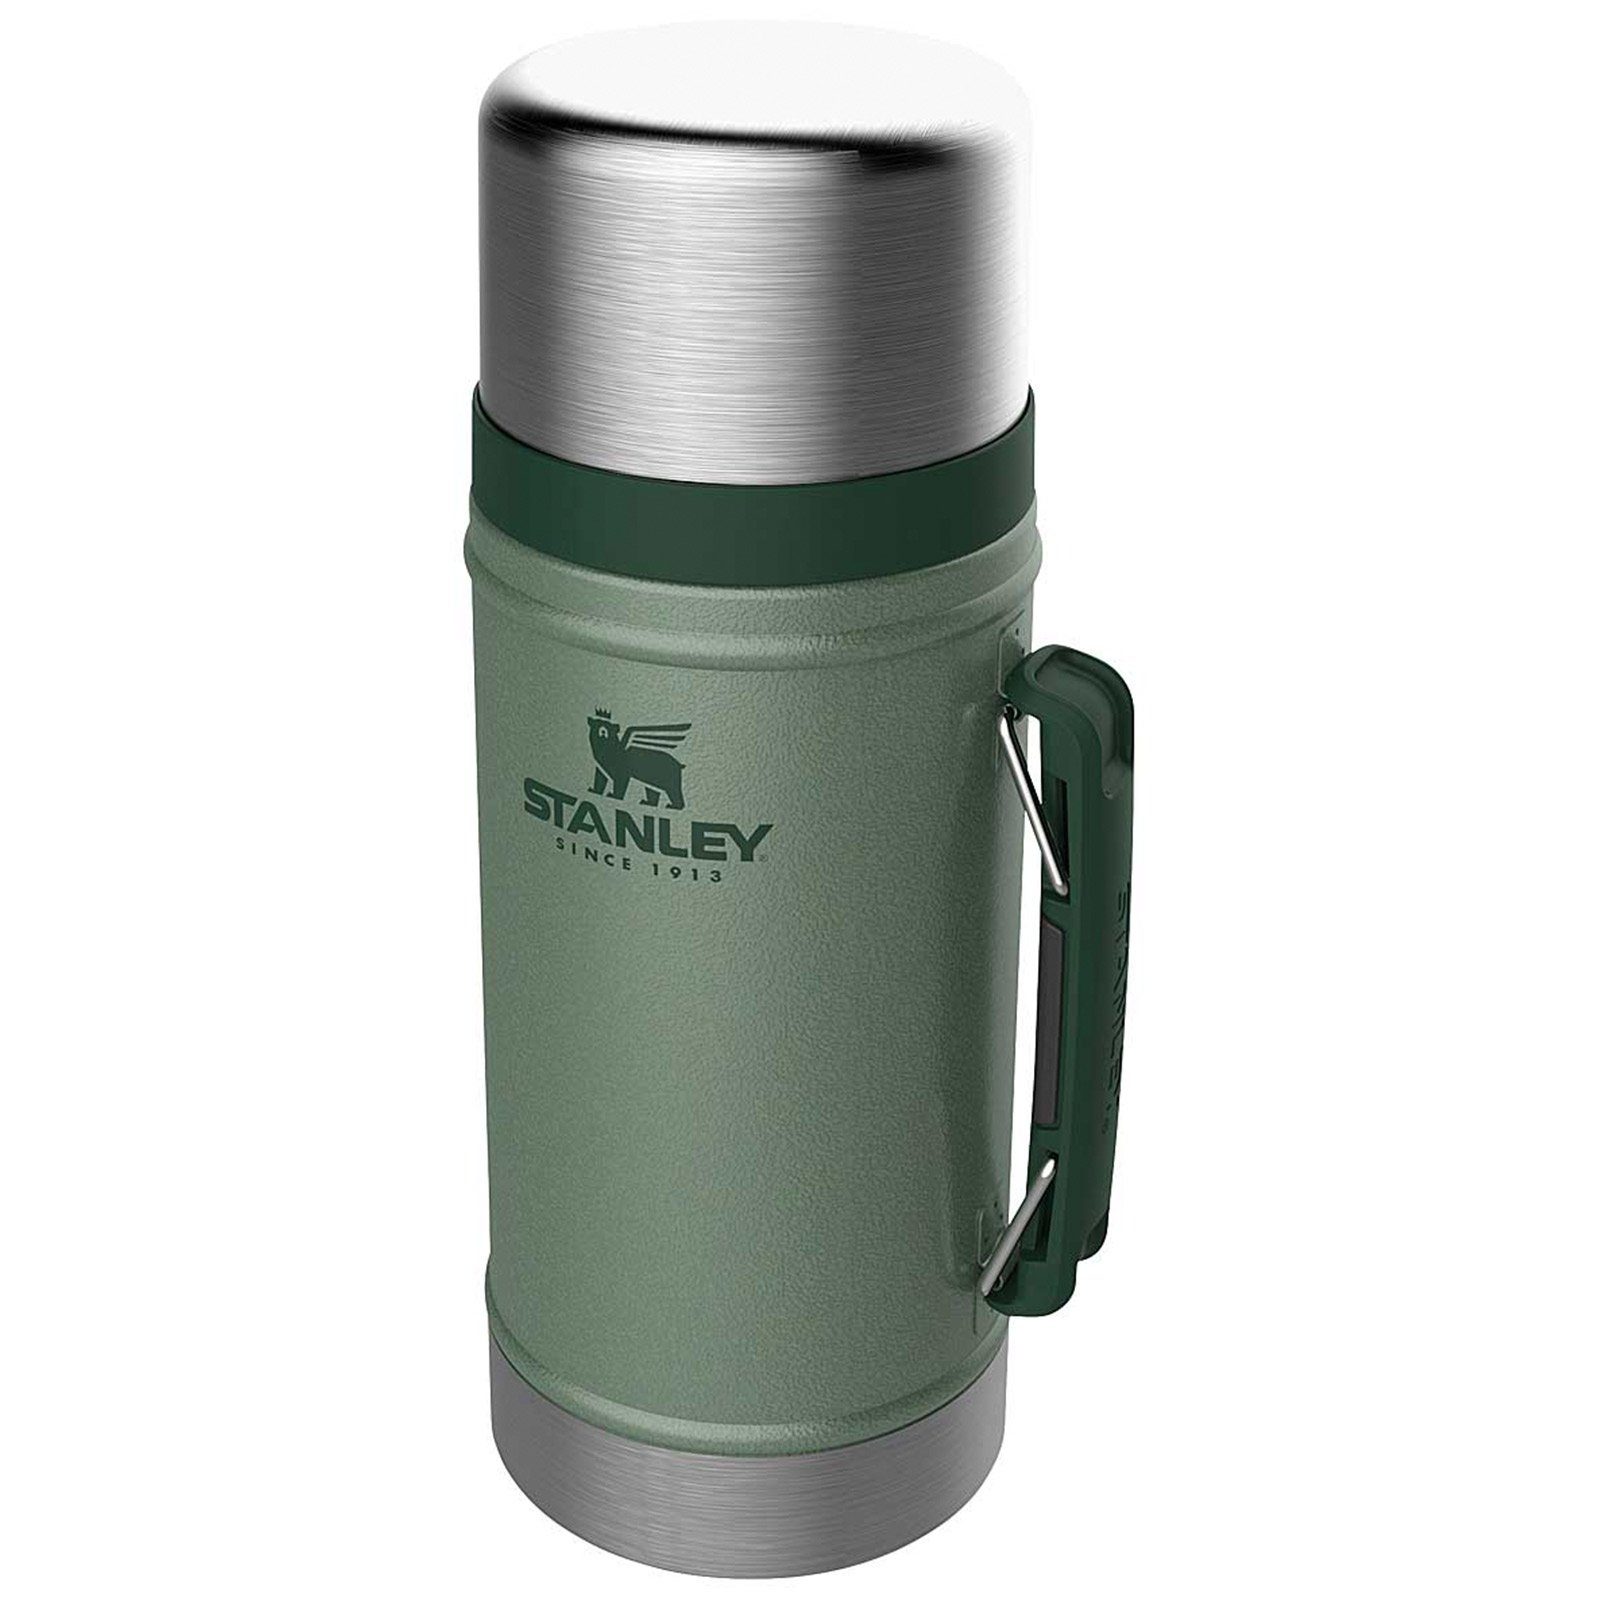 STANLEY Thermobehälter Classic Isolierbehälter Essen Thermo, Edelstahl 18/8, Food Behälter Container Griff 0,94L